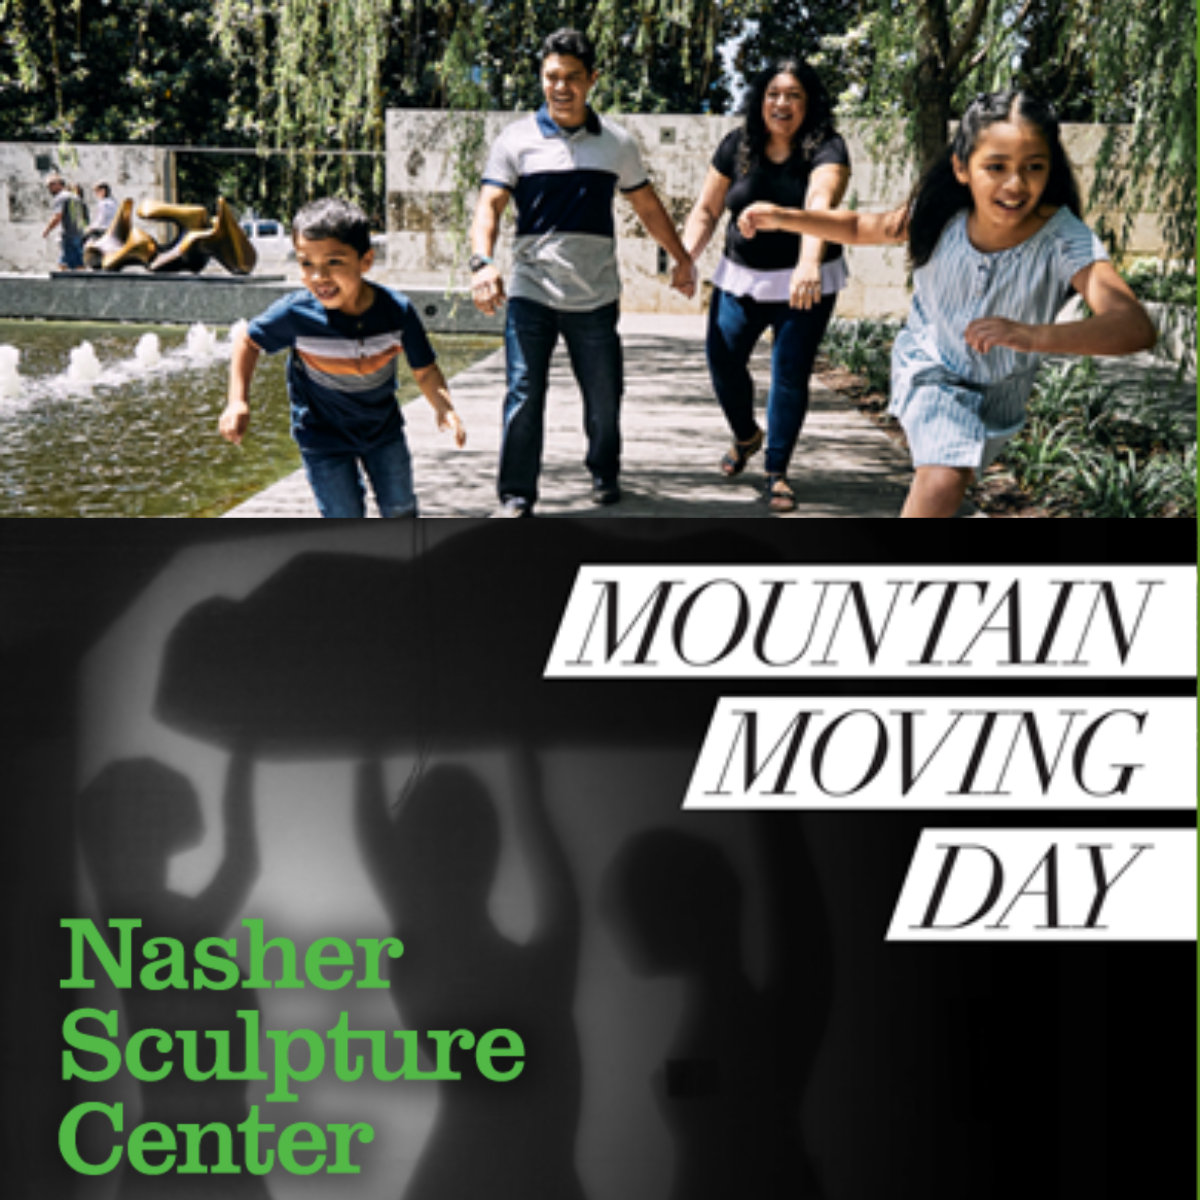 Mountain Moving Day: Nasher Sculpture Center